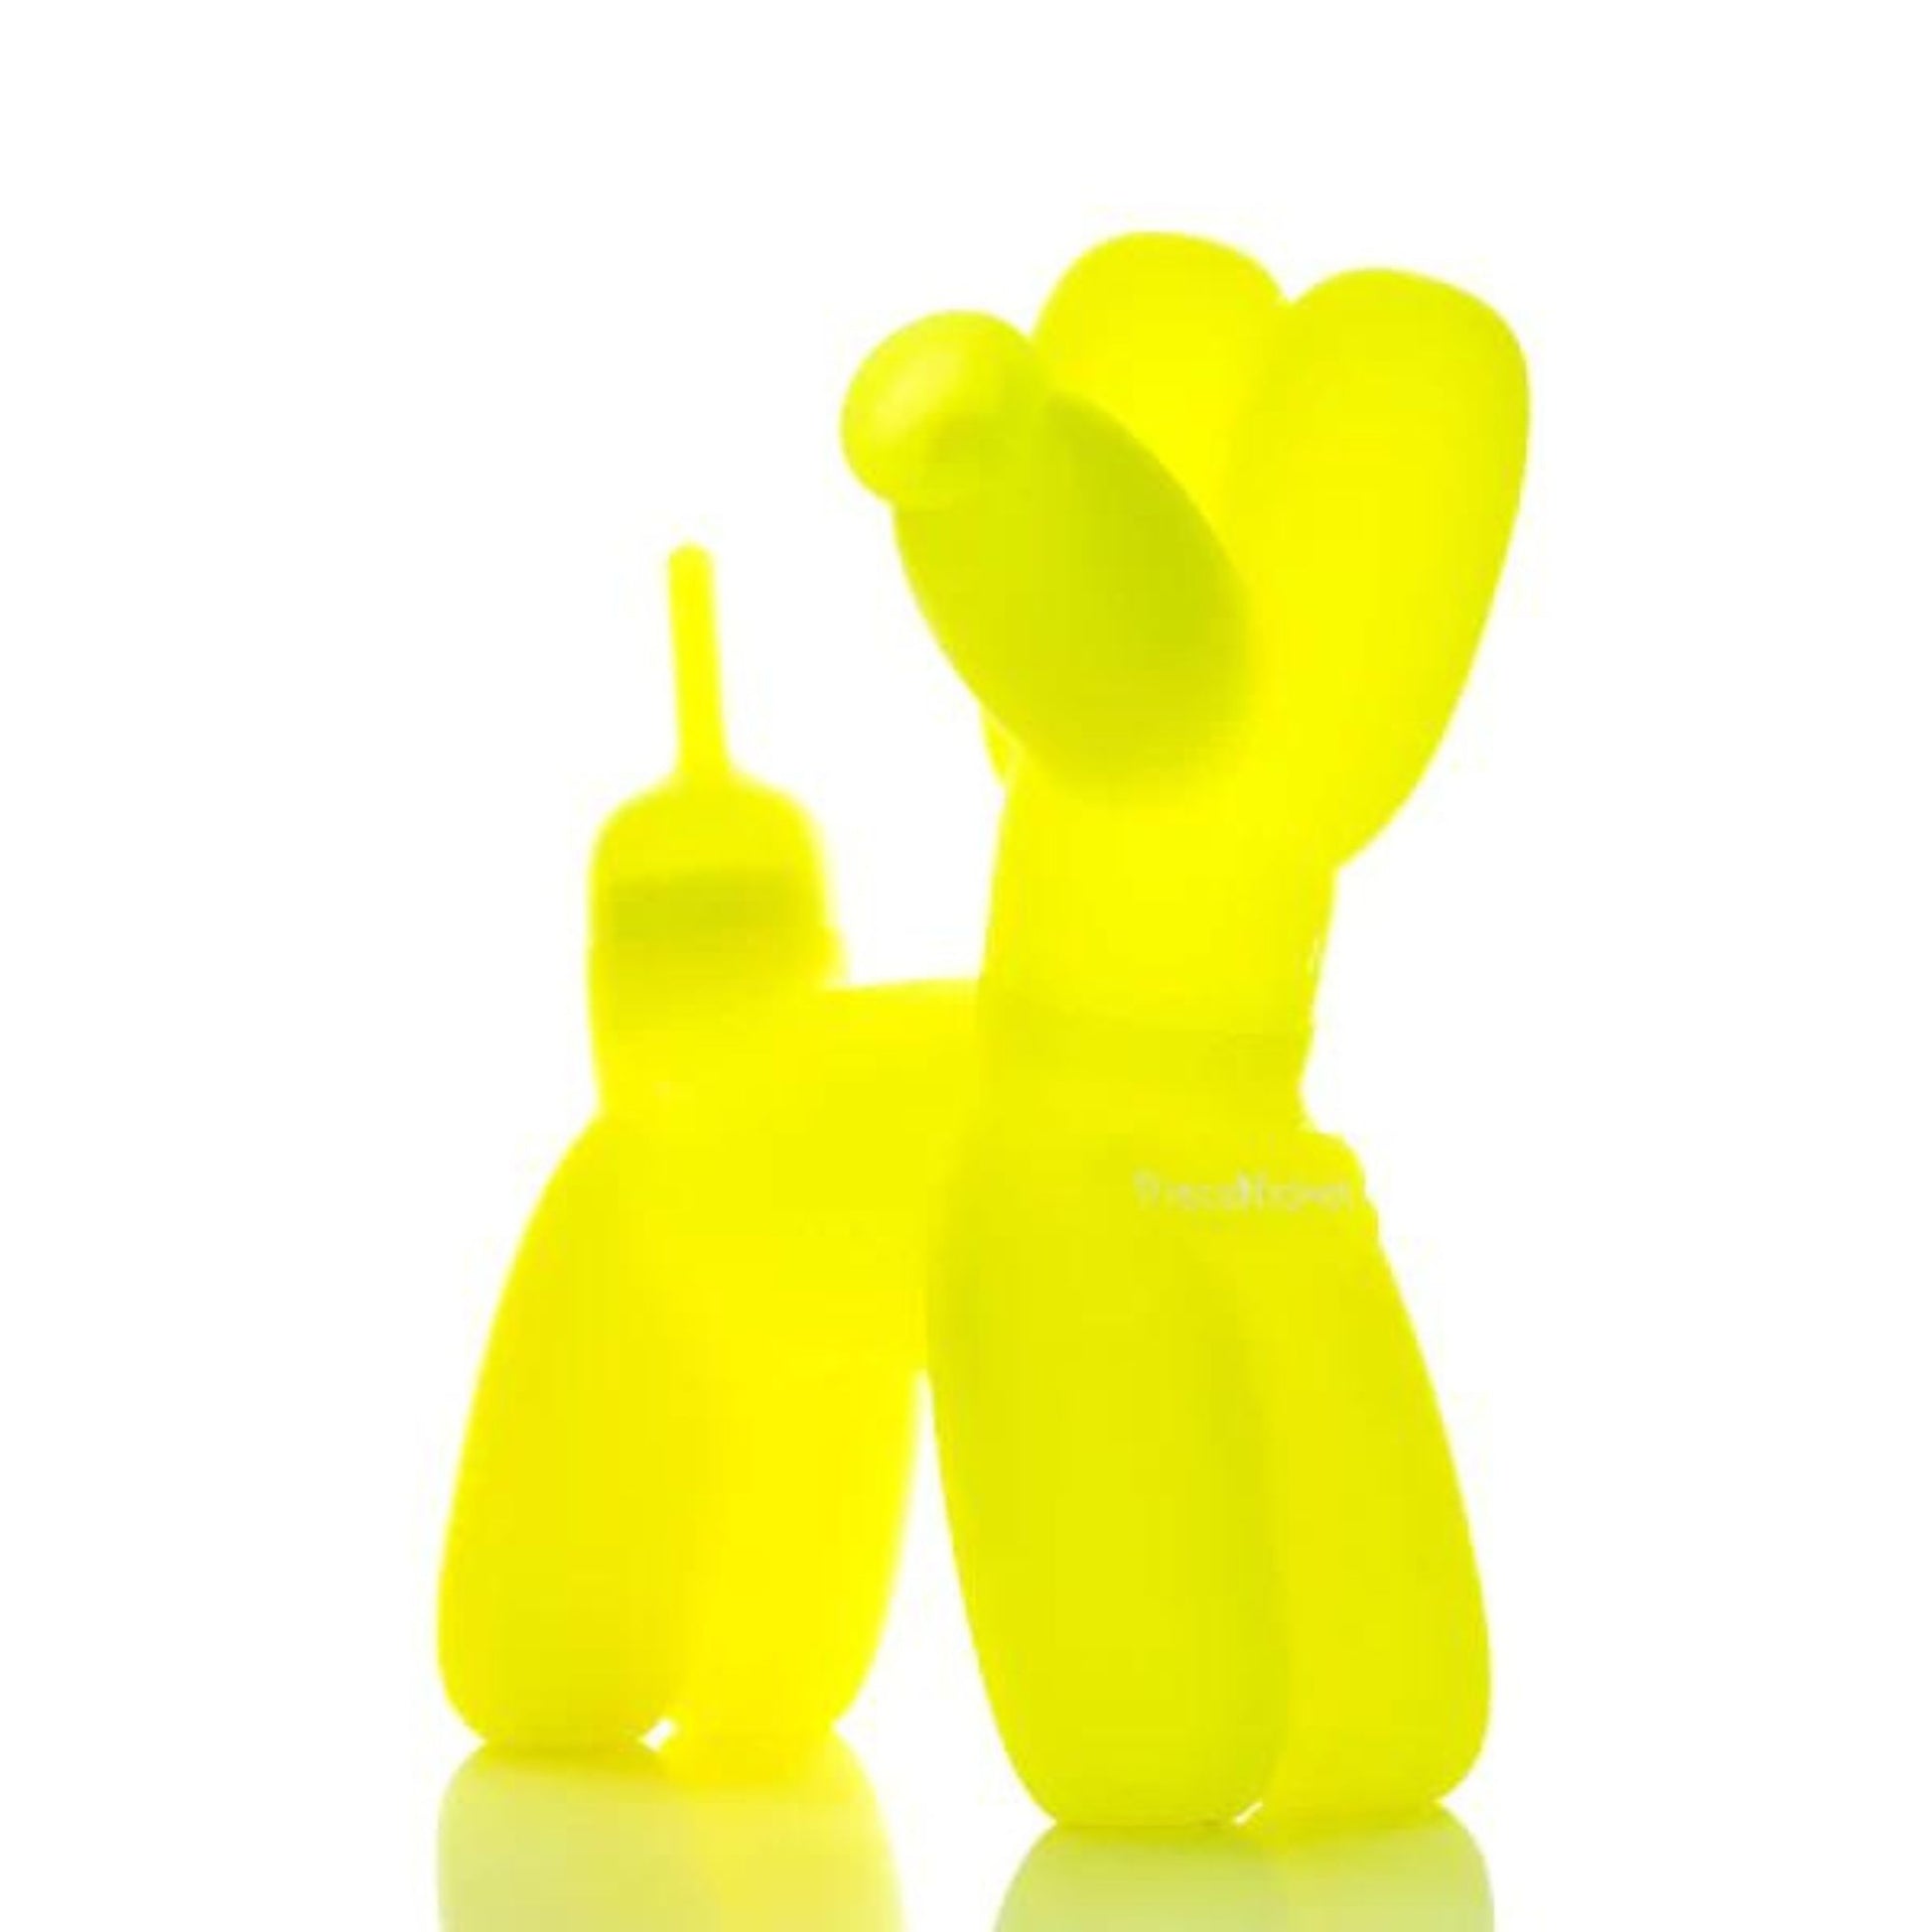 PIECEMAKER K9 SILICONE BONG